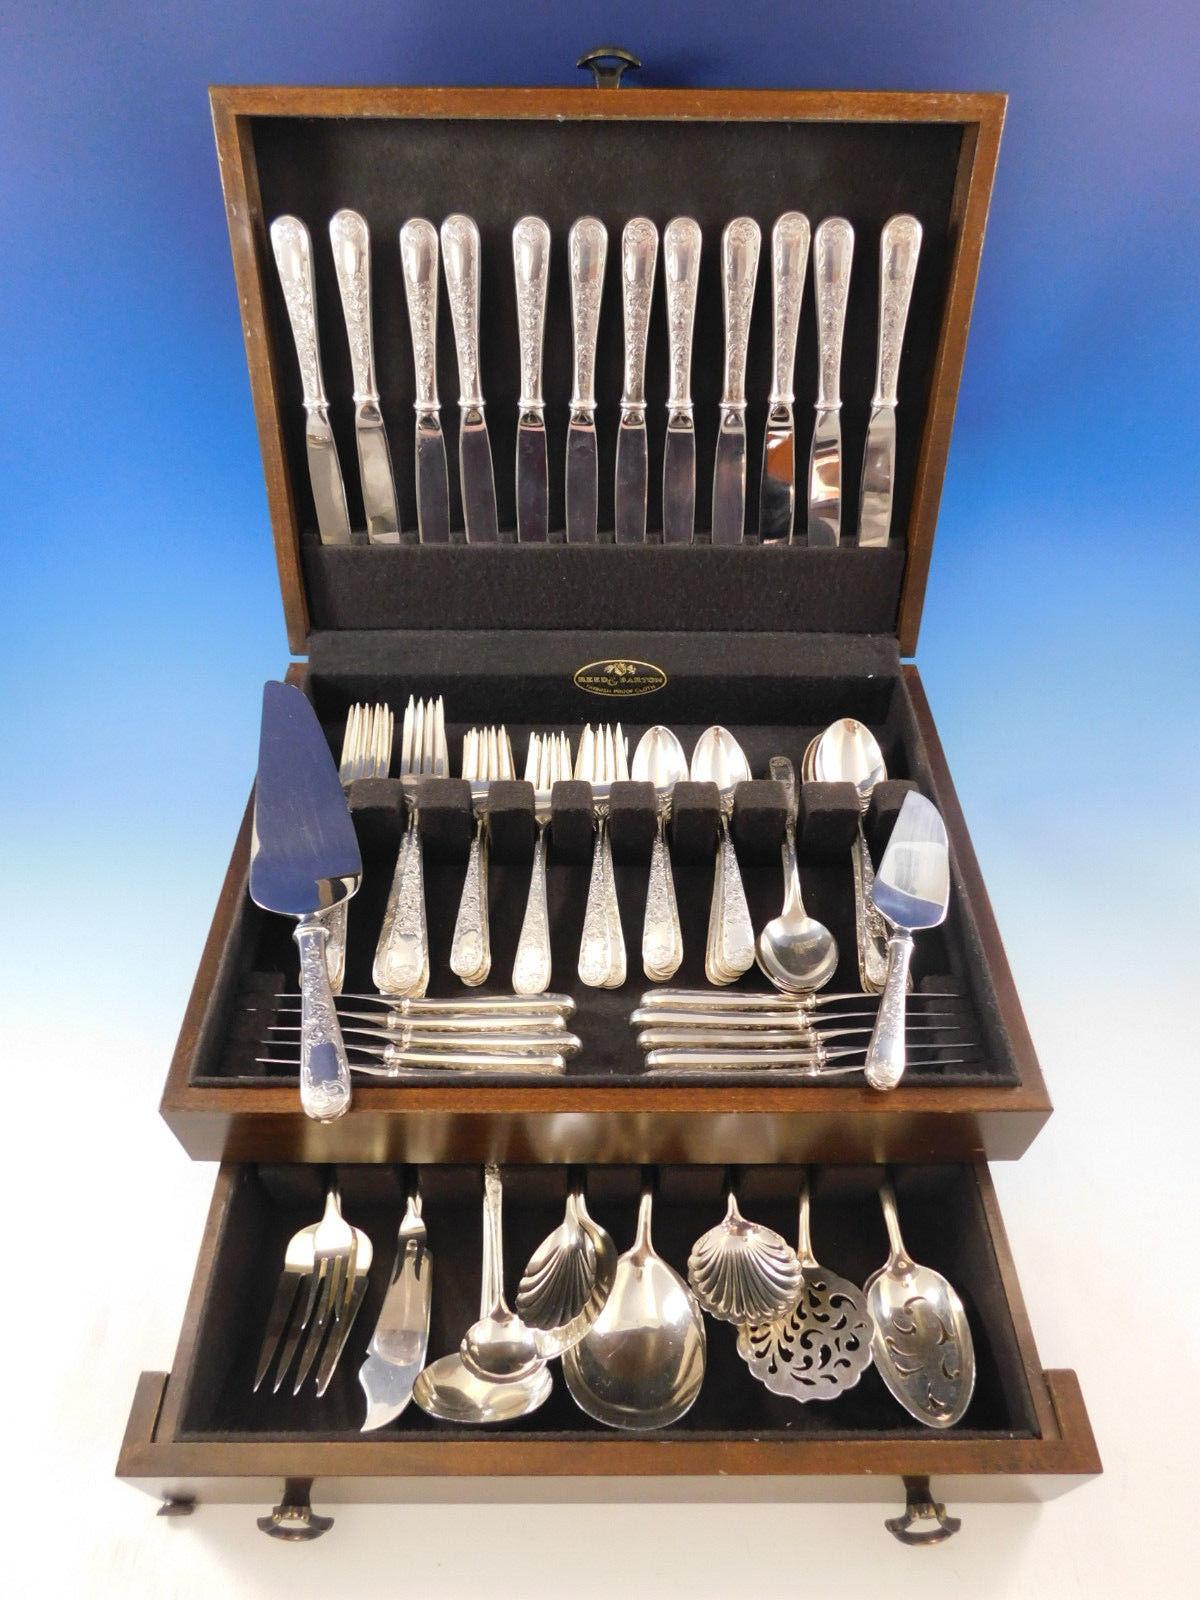 Old Maryland Engraved by Kirk sterling silver flatware set of 87 pieces, including many servers. This set includes:

12 knives, 9